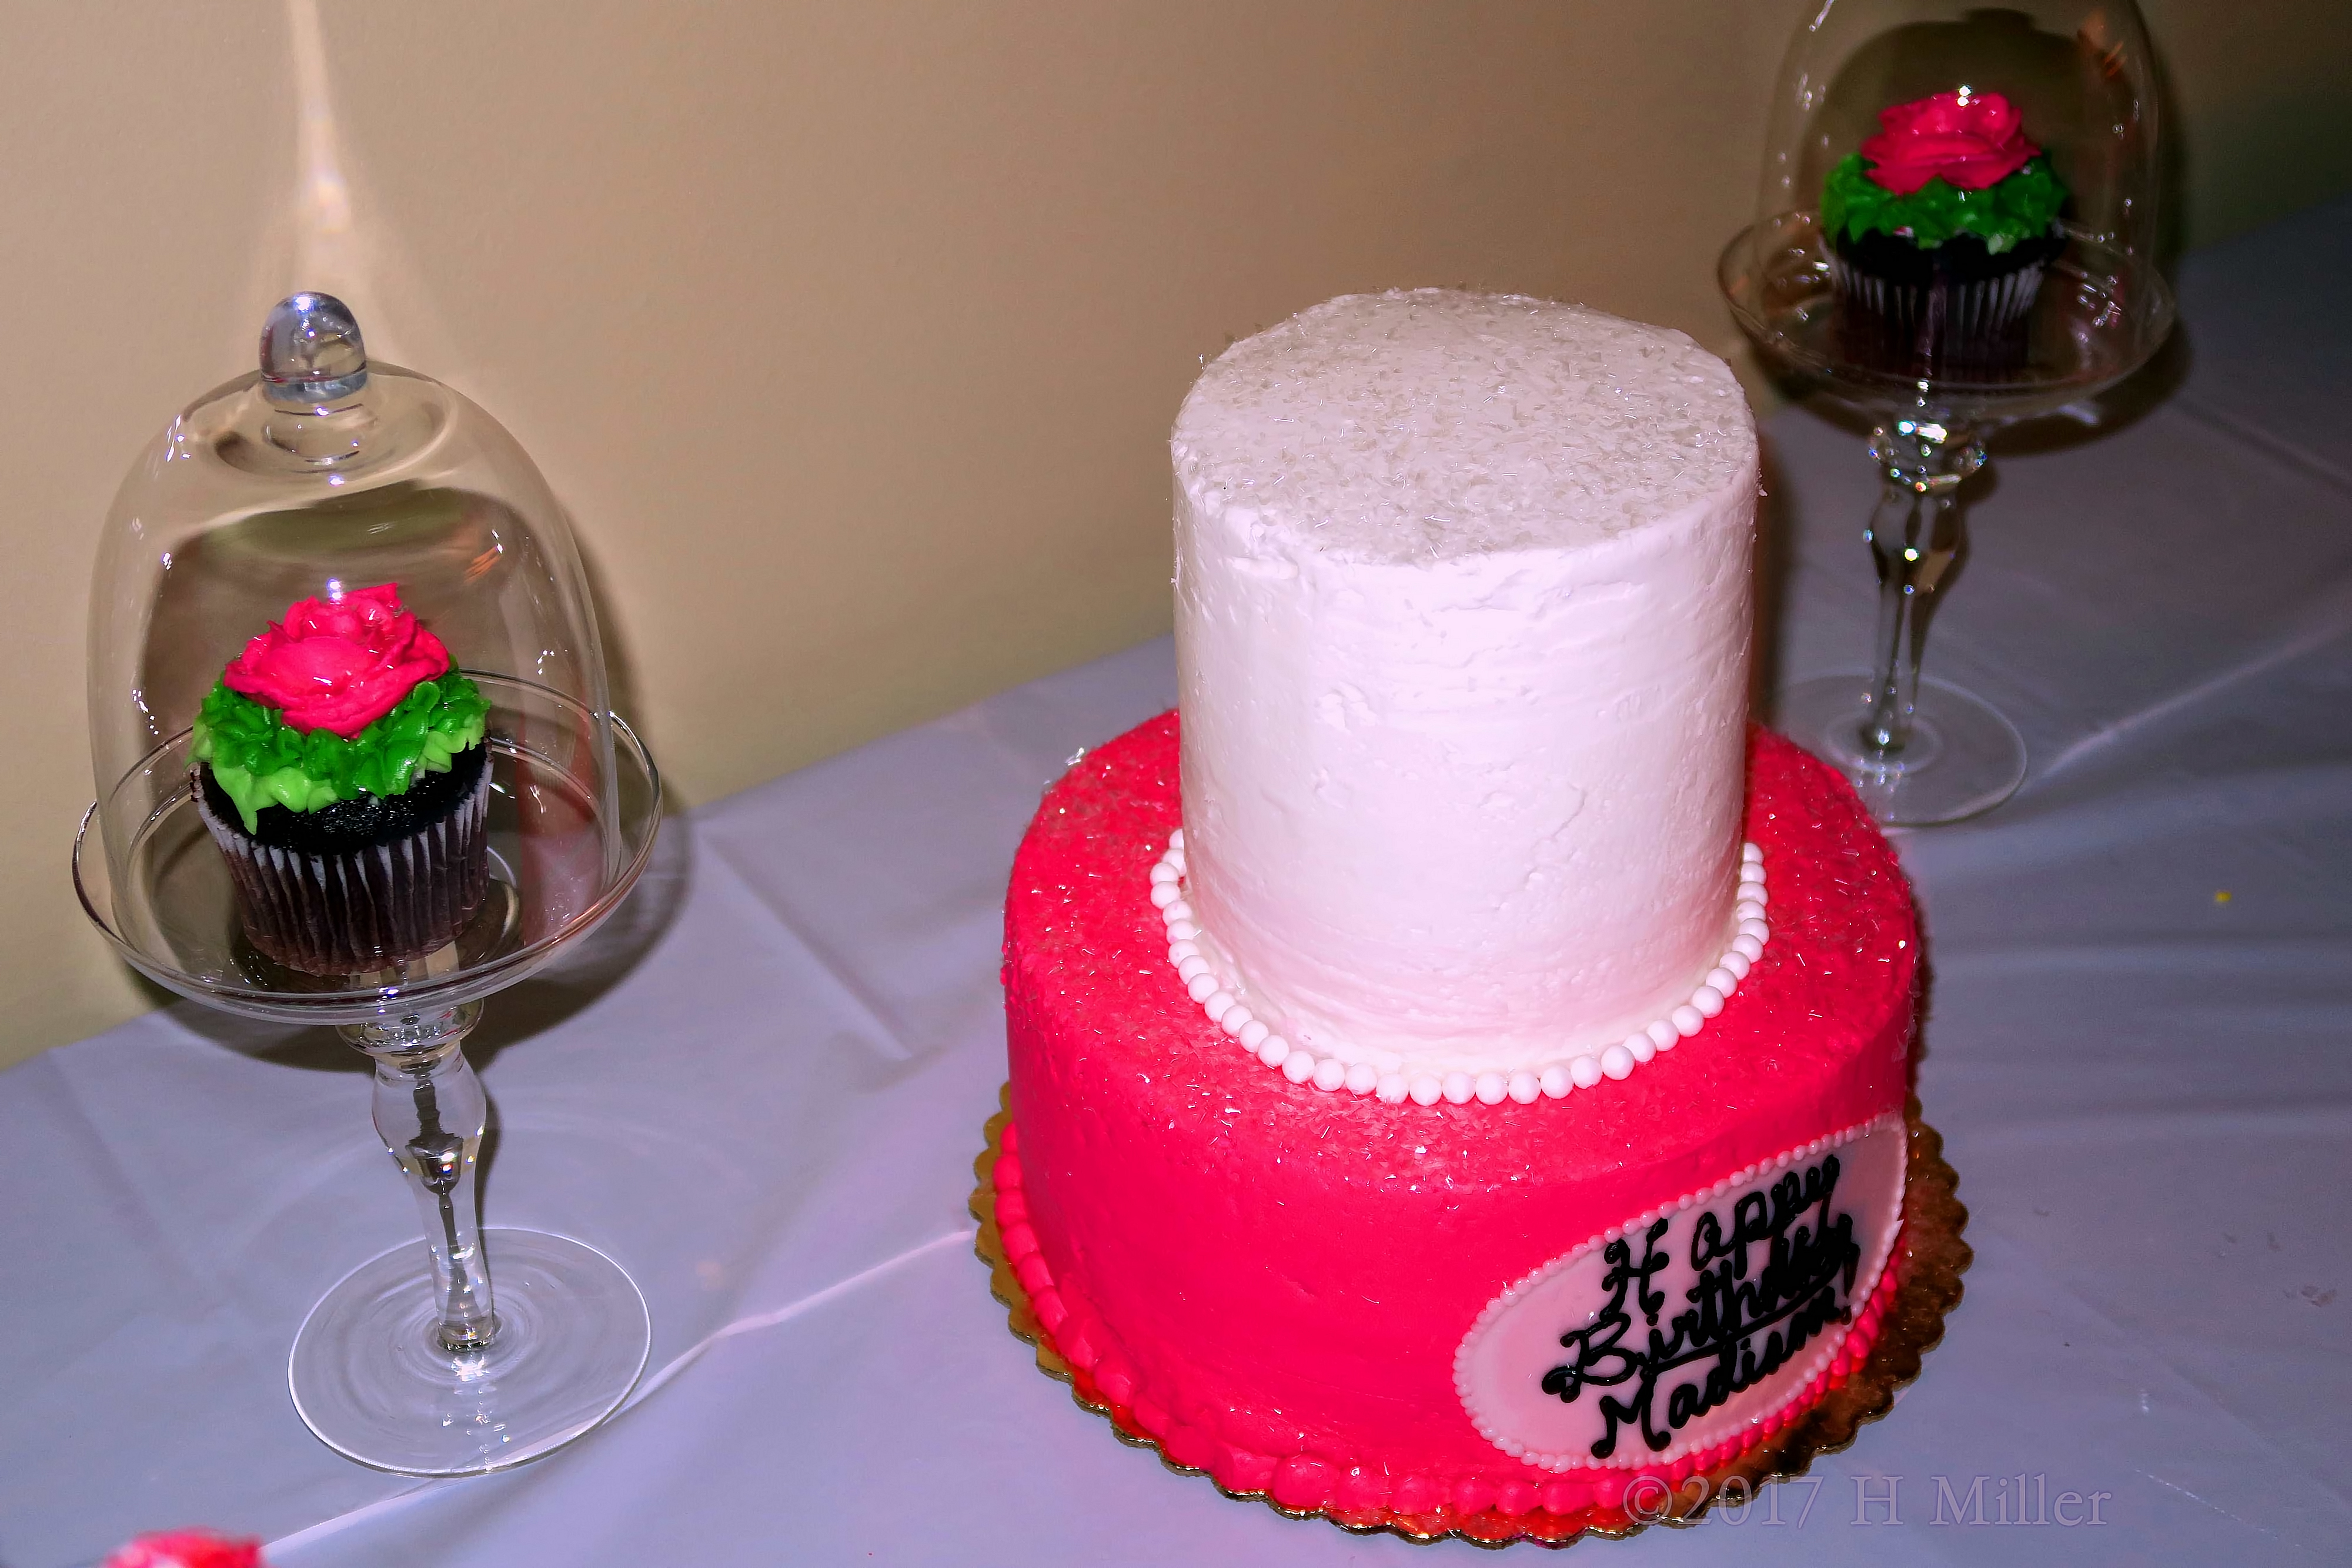 A Gorgeous Spa Party Themed Nail Polish Cake And Rose Cupcakes 4